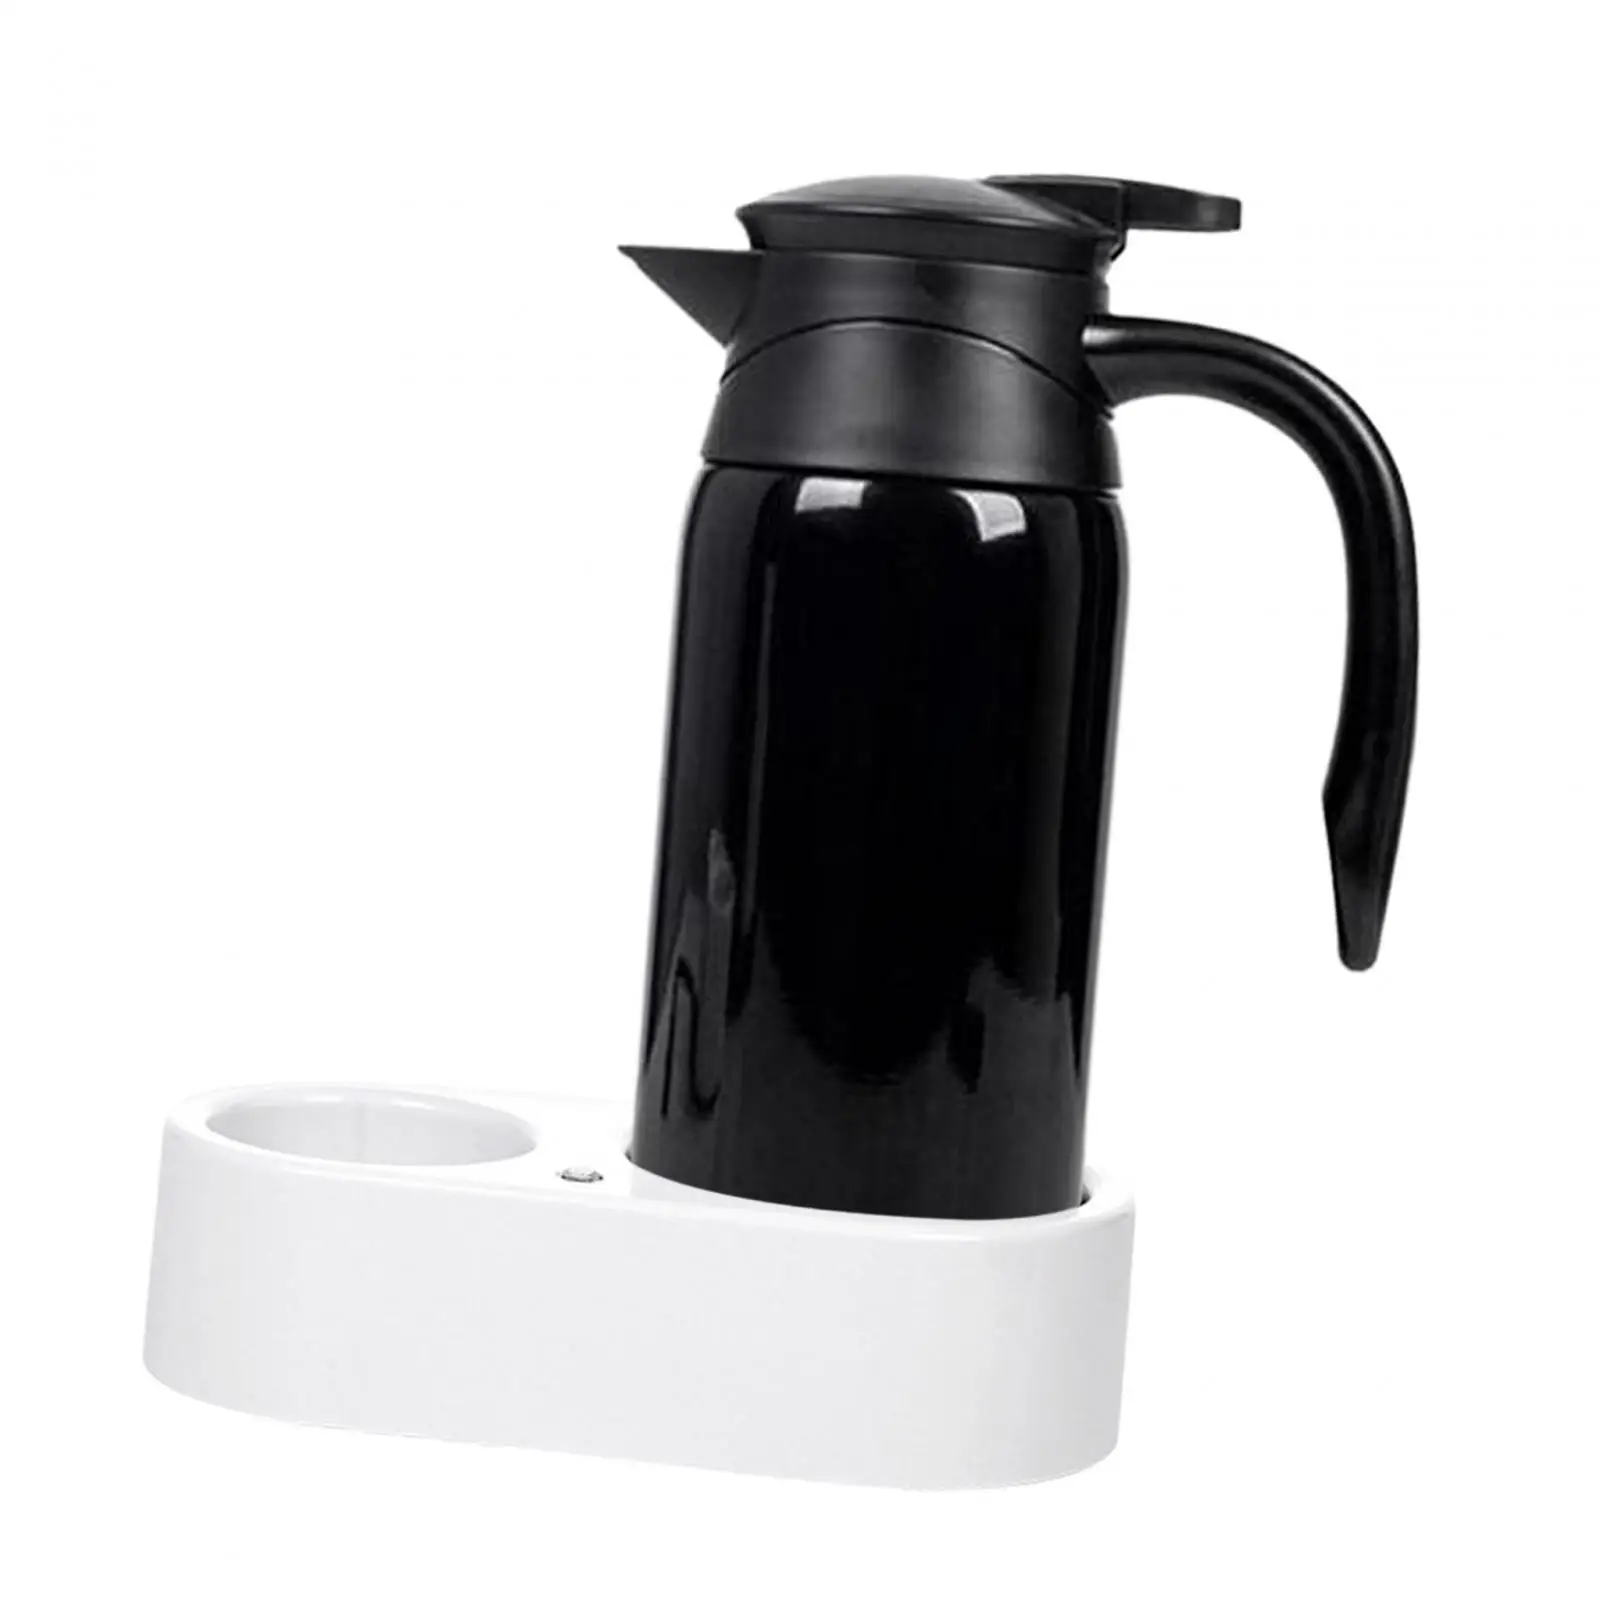 12V 24V 800ml Car Kettle Electric Water Kettle Portable for Tea Coffee